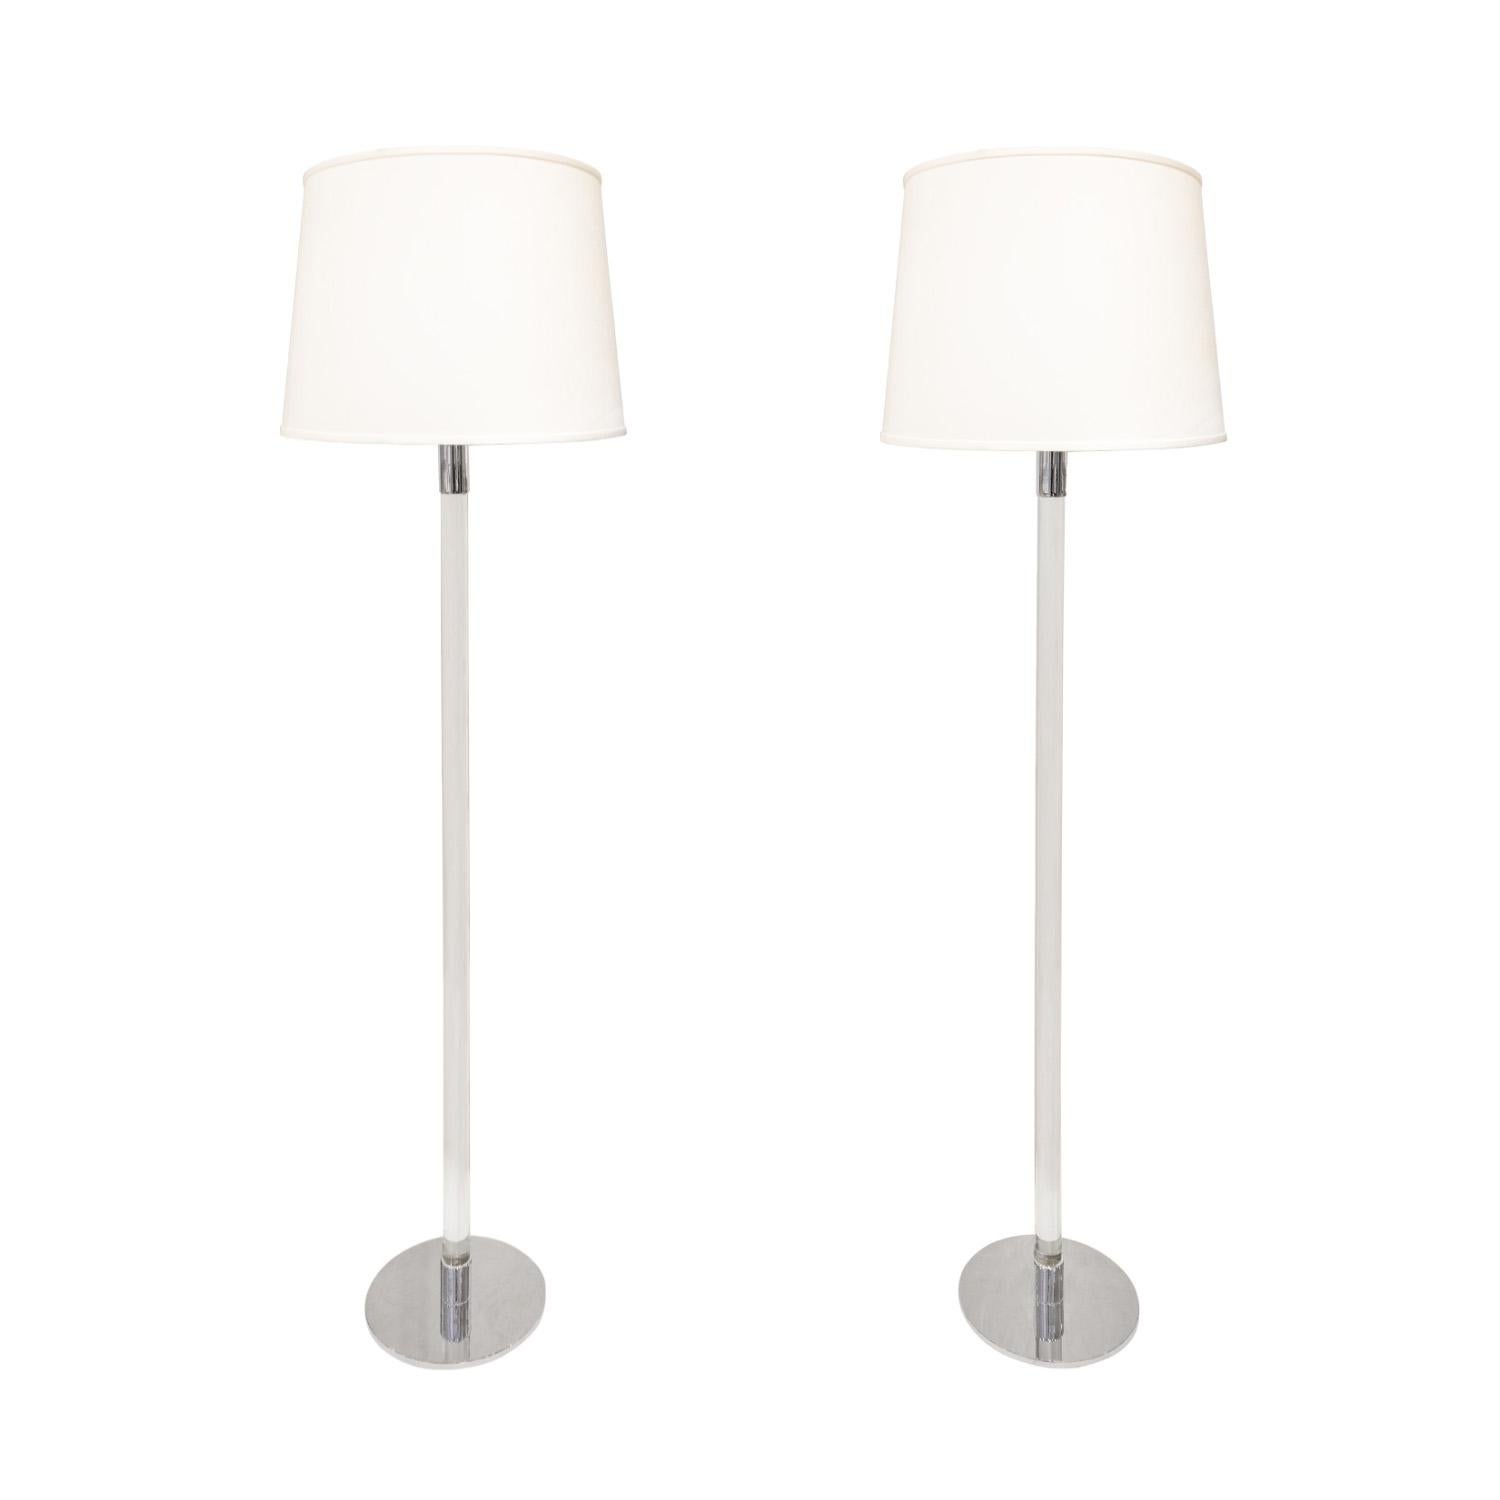 Pair of elegant floor lamps in chrome with glass rods, each with 3 bulbs, by Hansen Lighting, American 1960s (Signed on bases “Hansen Lamps Inc. N.Y.”) The cords are embedded in the glass so when the cords are faced to the side of the lamp they